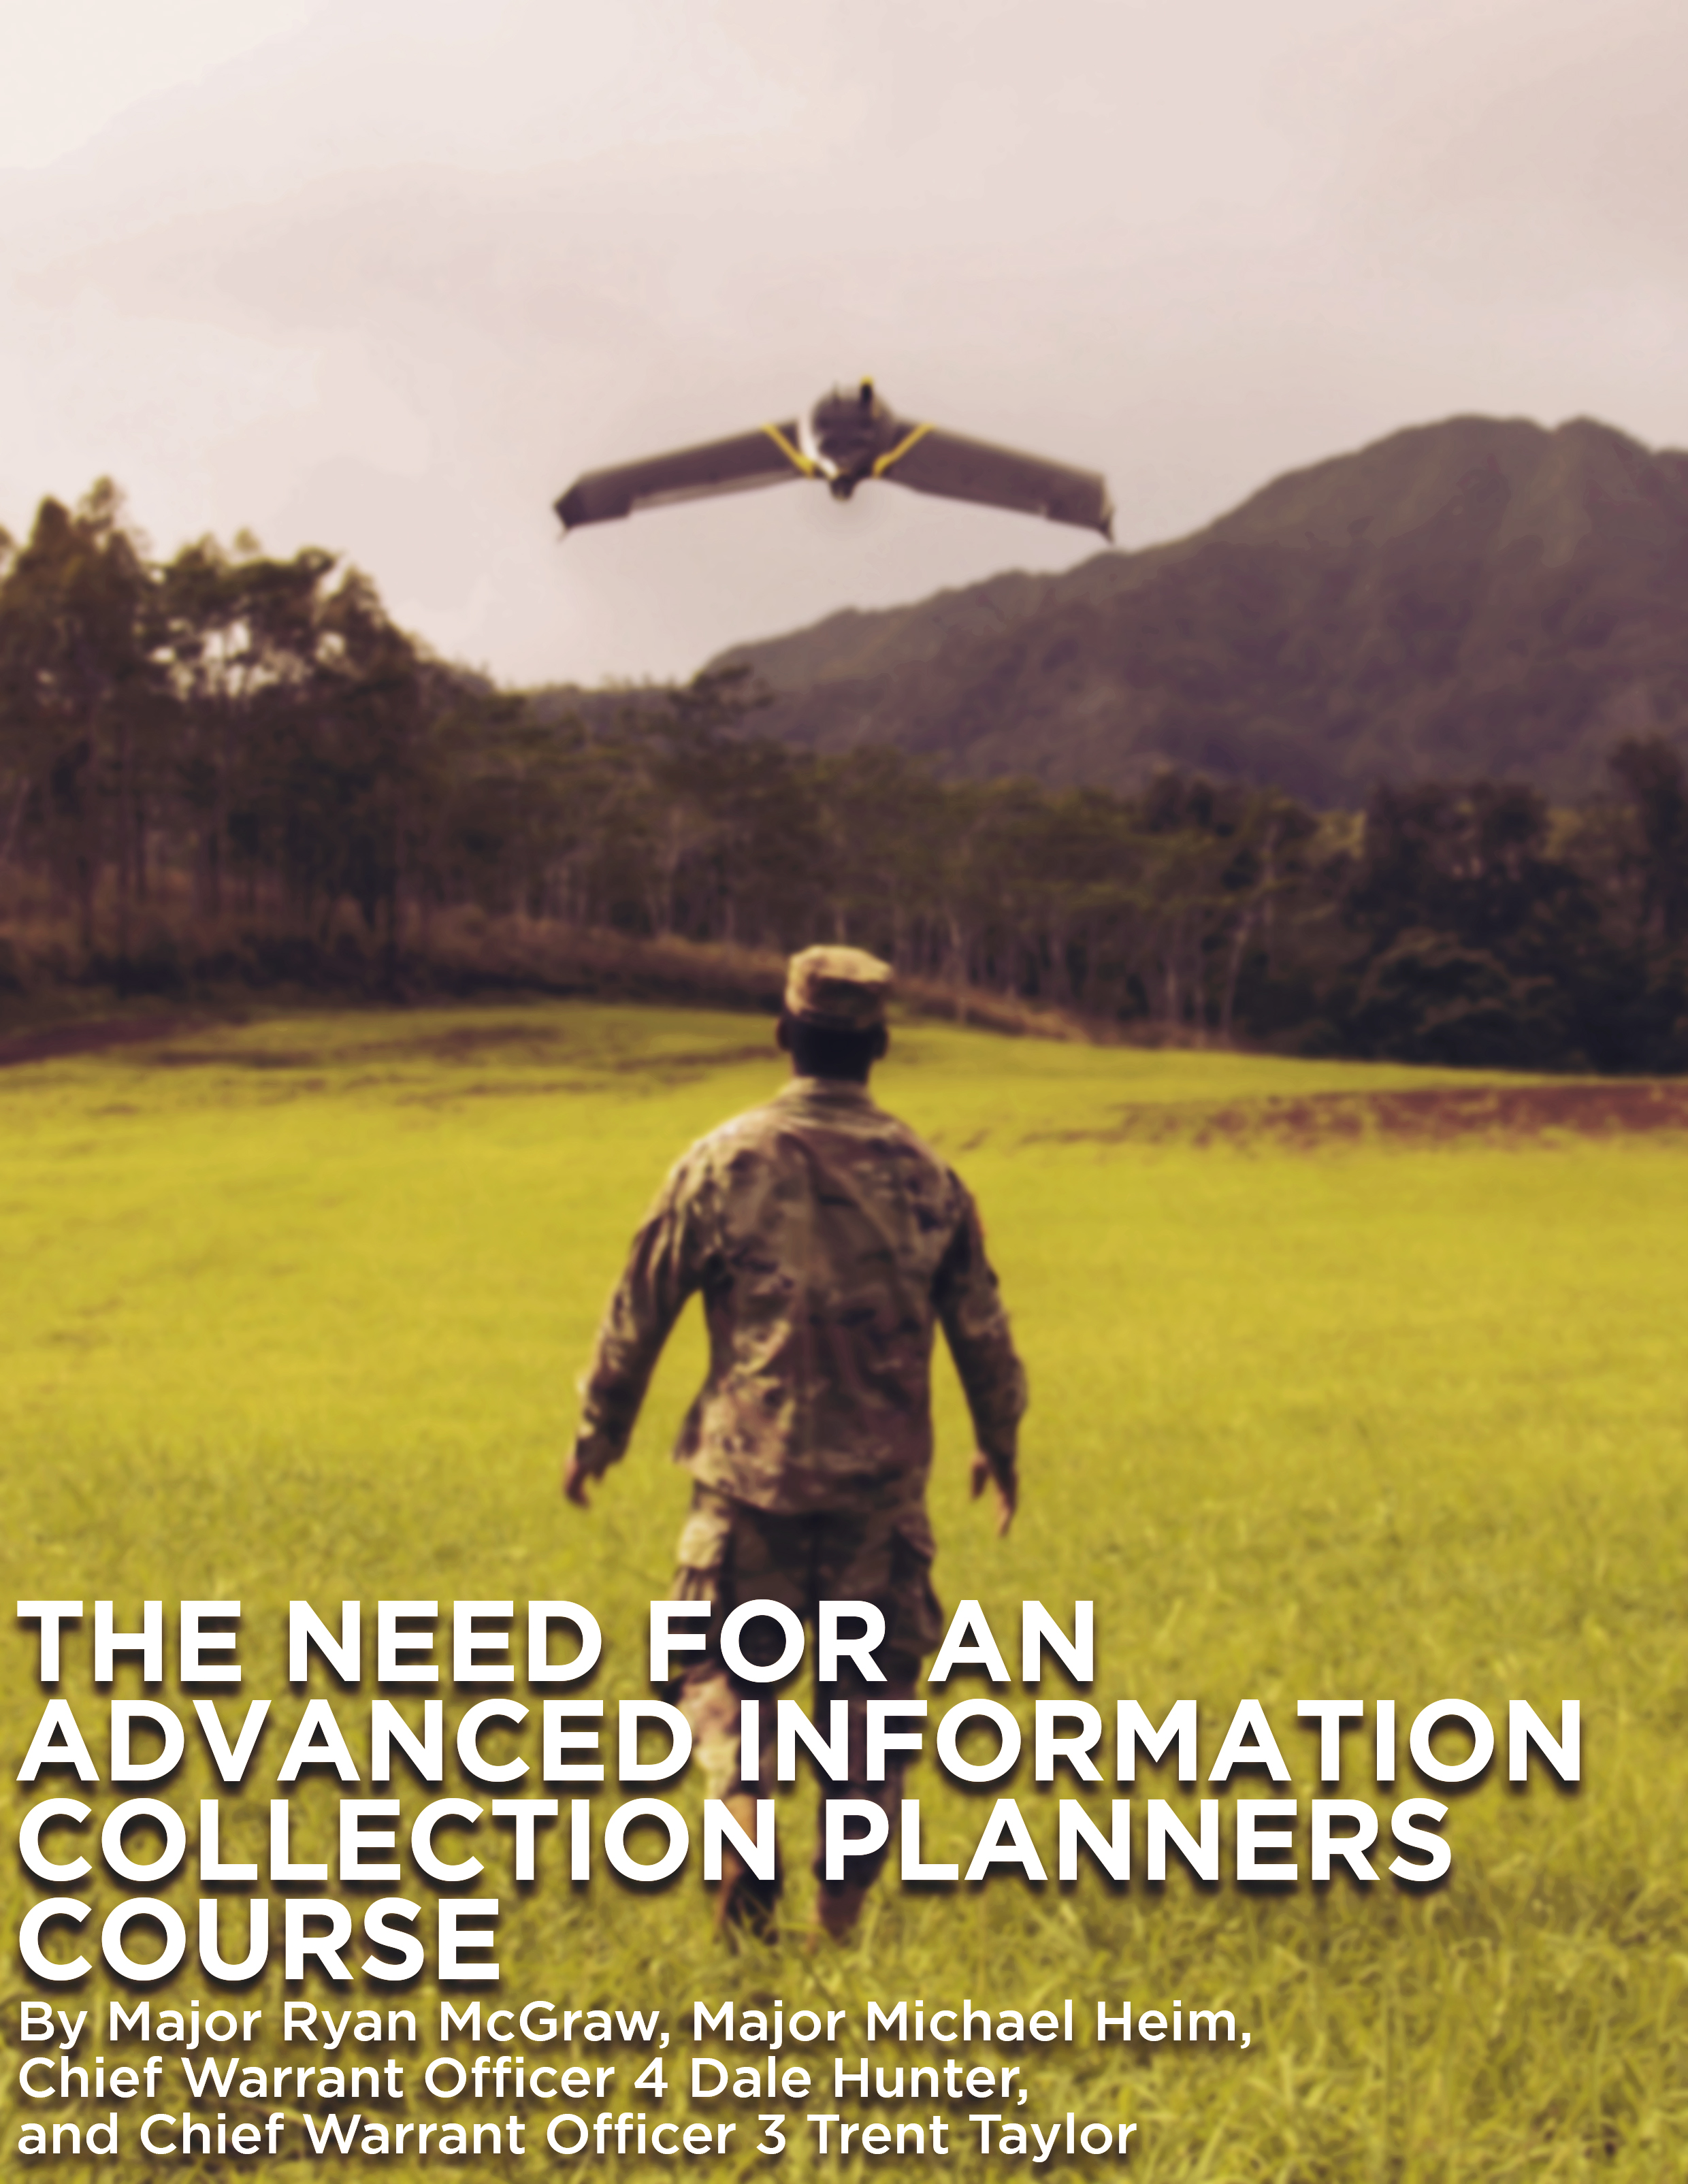 The Need for an Advanced Information Collection Planners Course